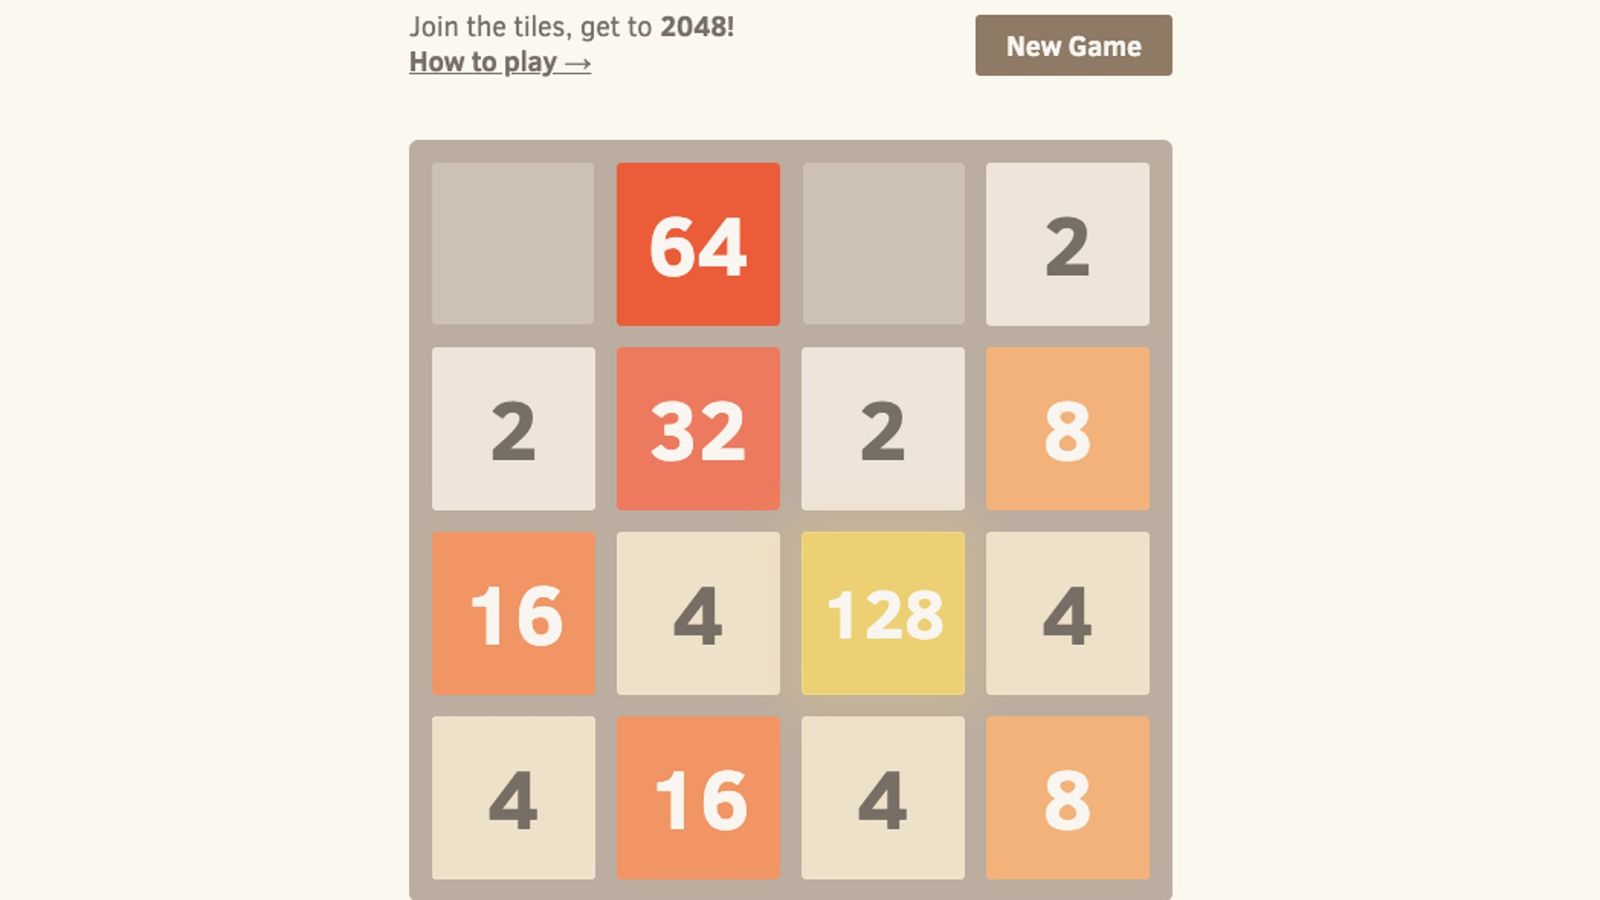 Image of a match in progress in 2048.